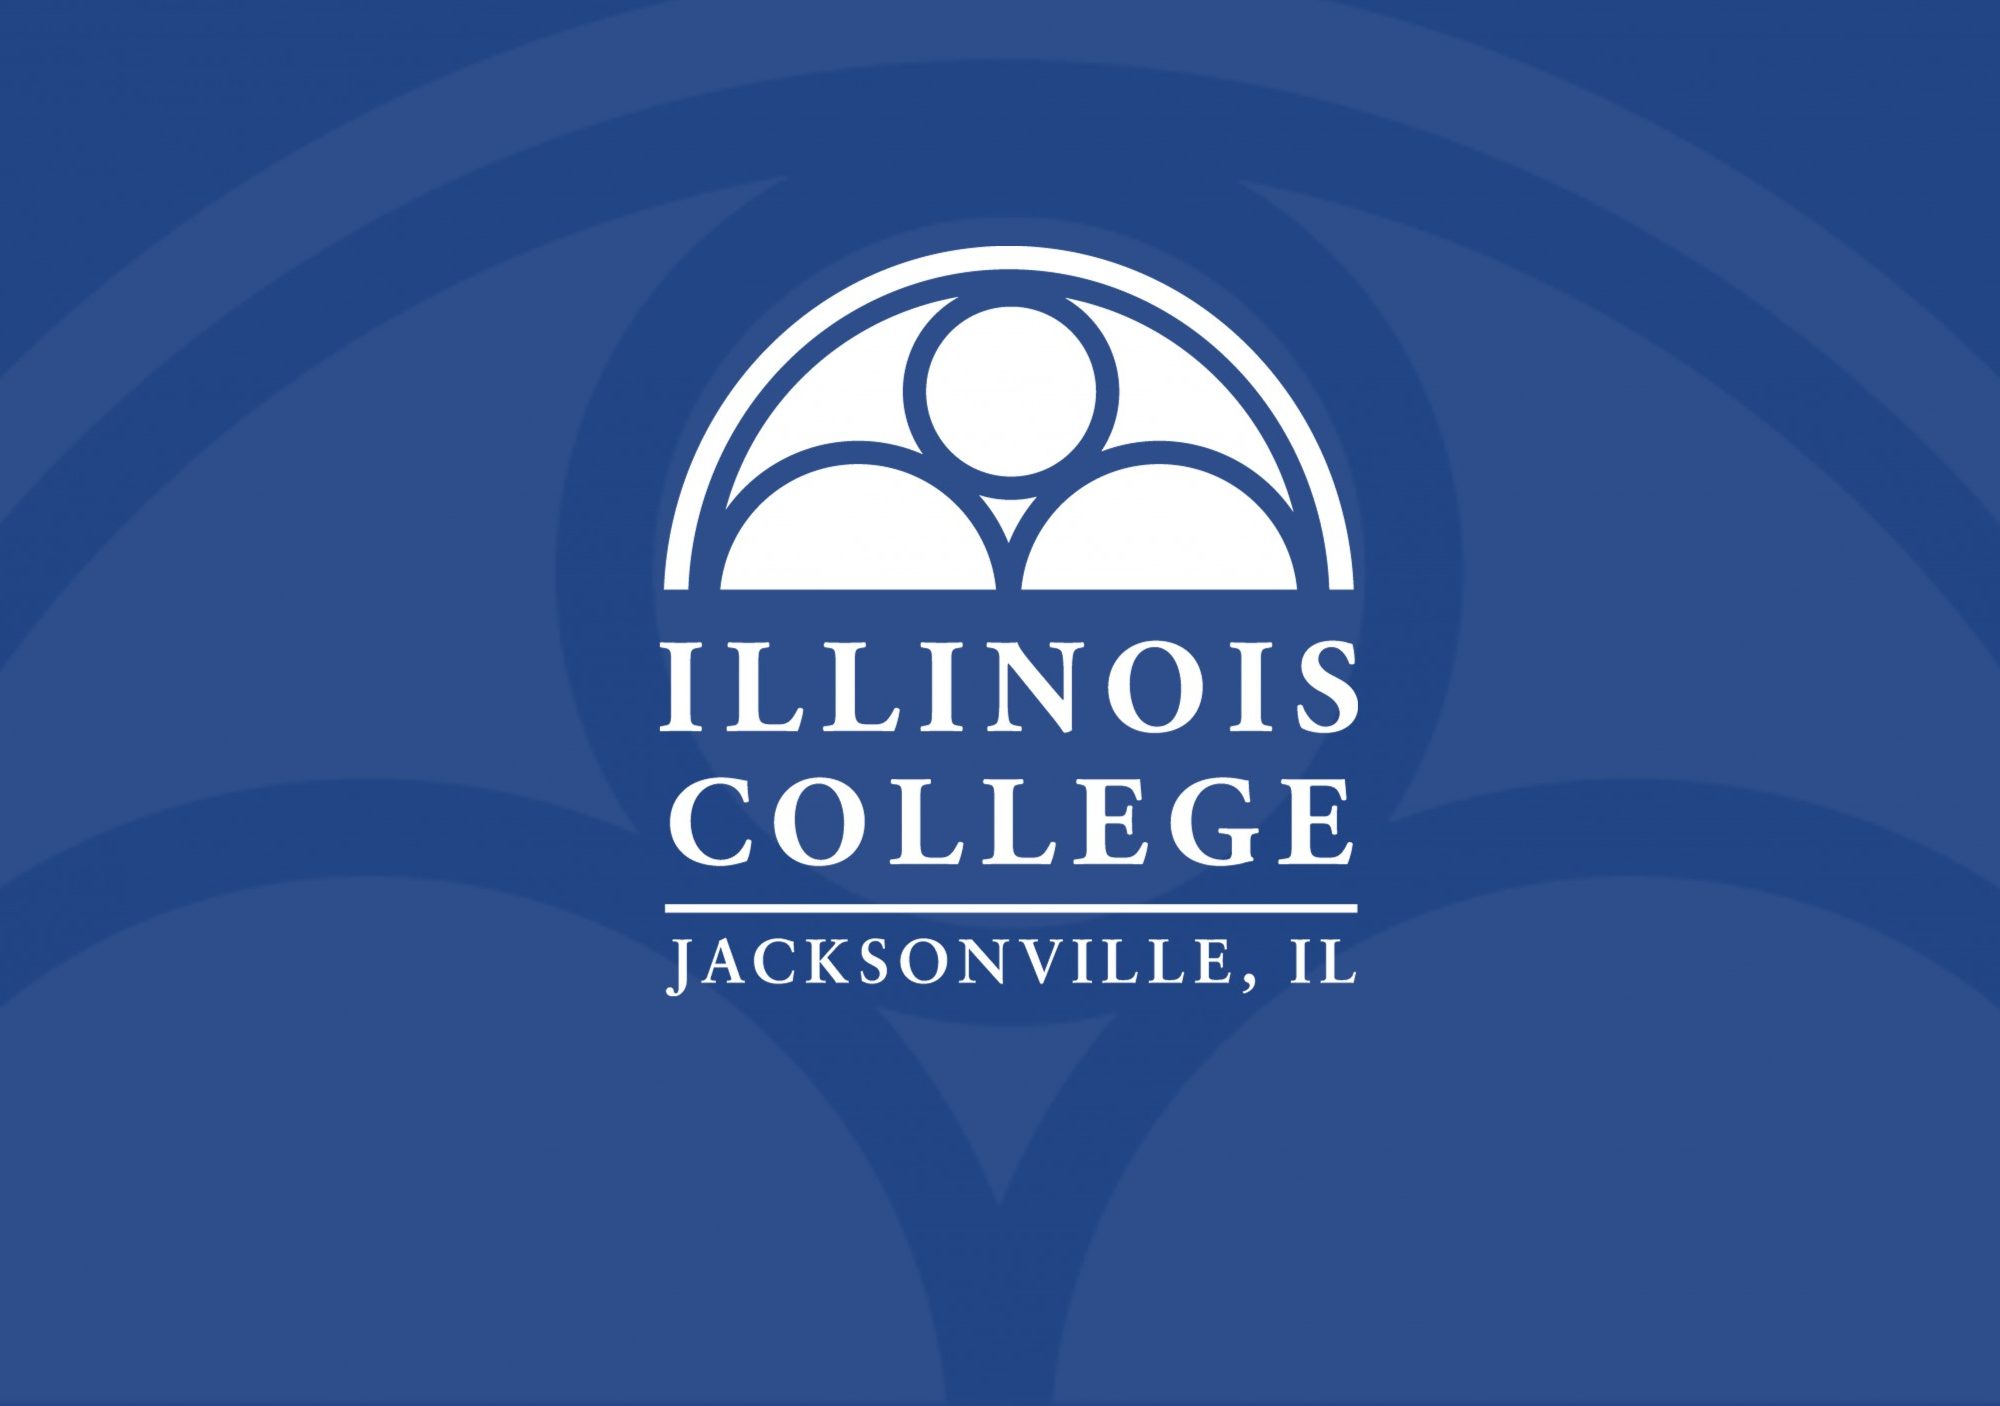 Illinois College
Degree in Human Resources